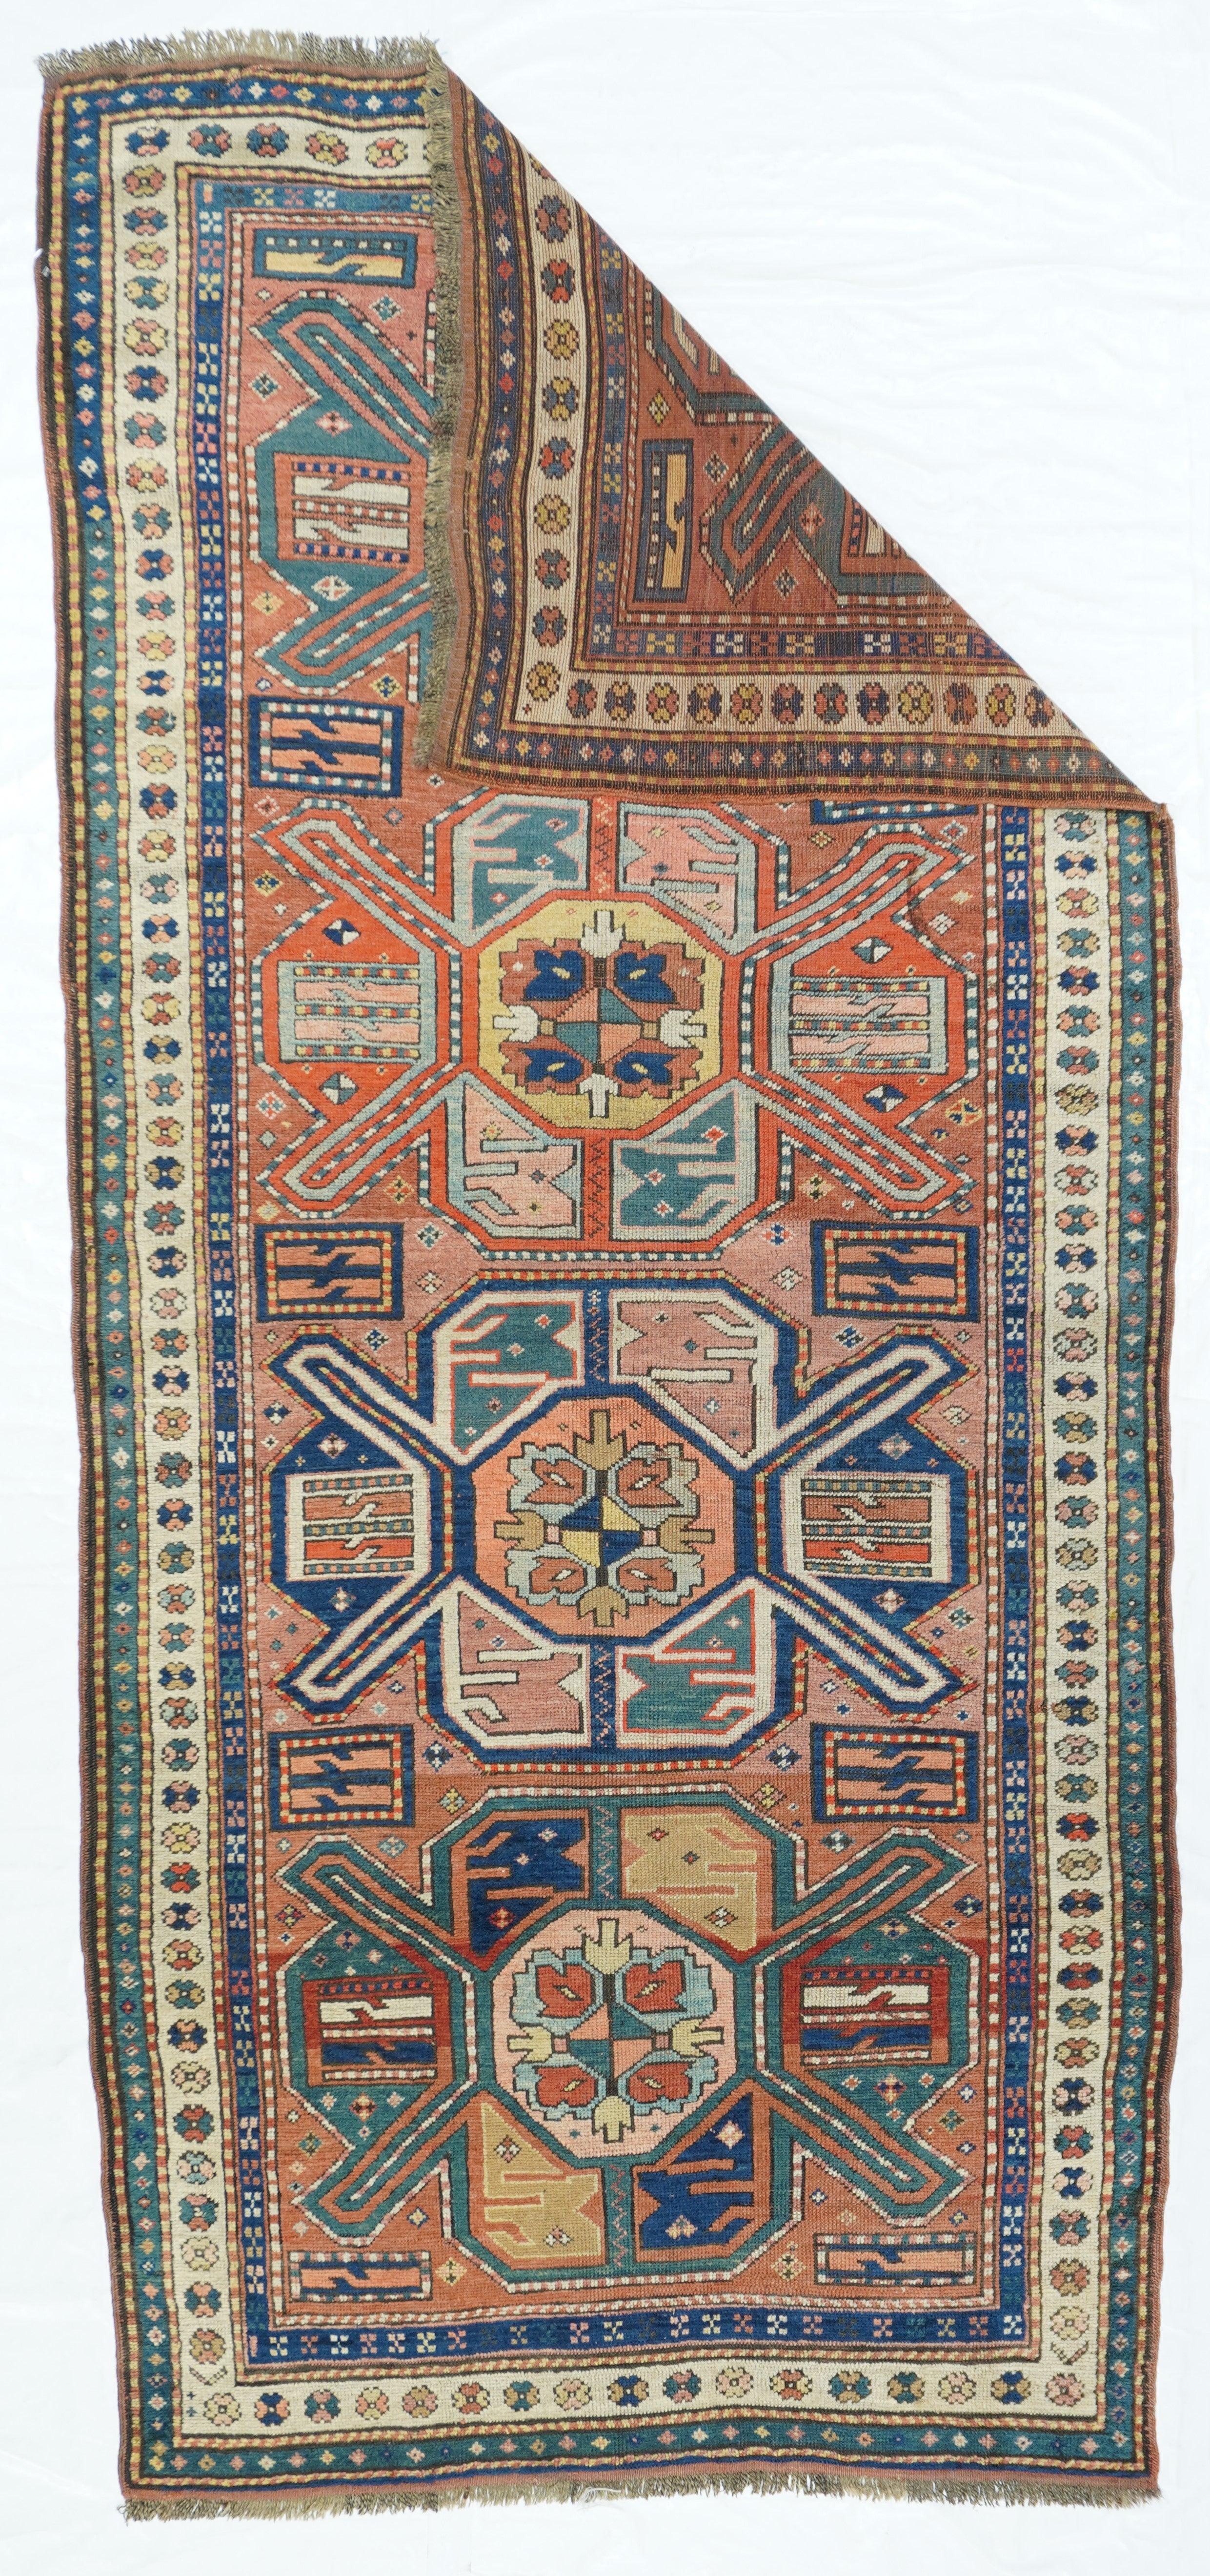 Antique Russian Kazak rug,measures : 3'11'' x 8'7''. The well-abrashed light rust to dusty rose field of this southern Caucasian kellegi display four large Turkmen-style vígulsvì with ivory, royal blue, green and khaki details Each motif is centred